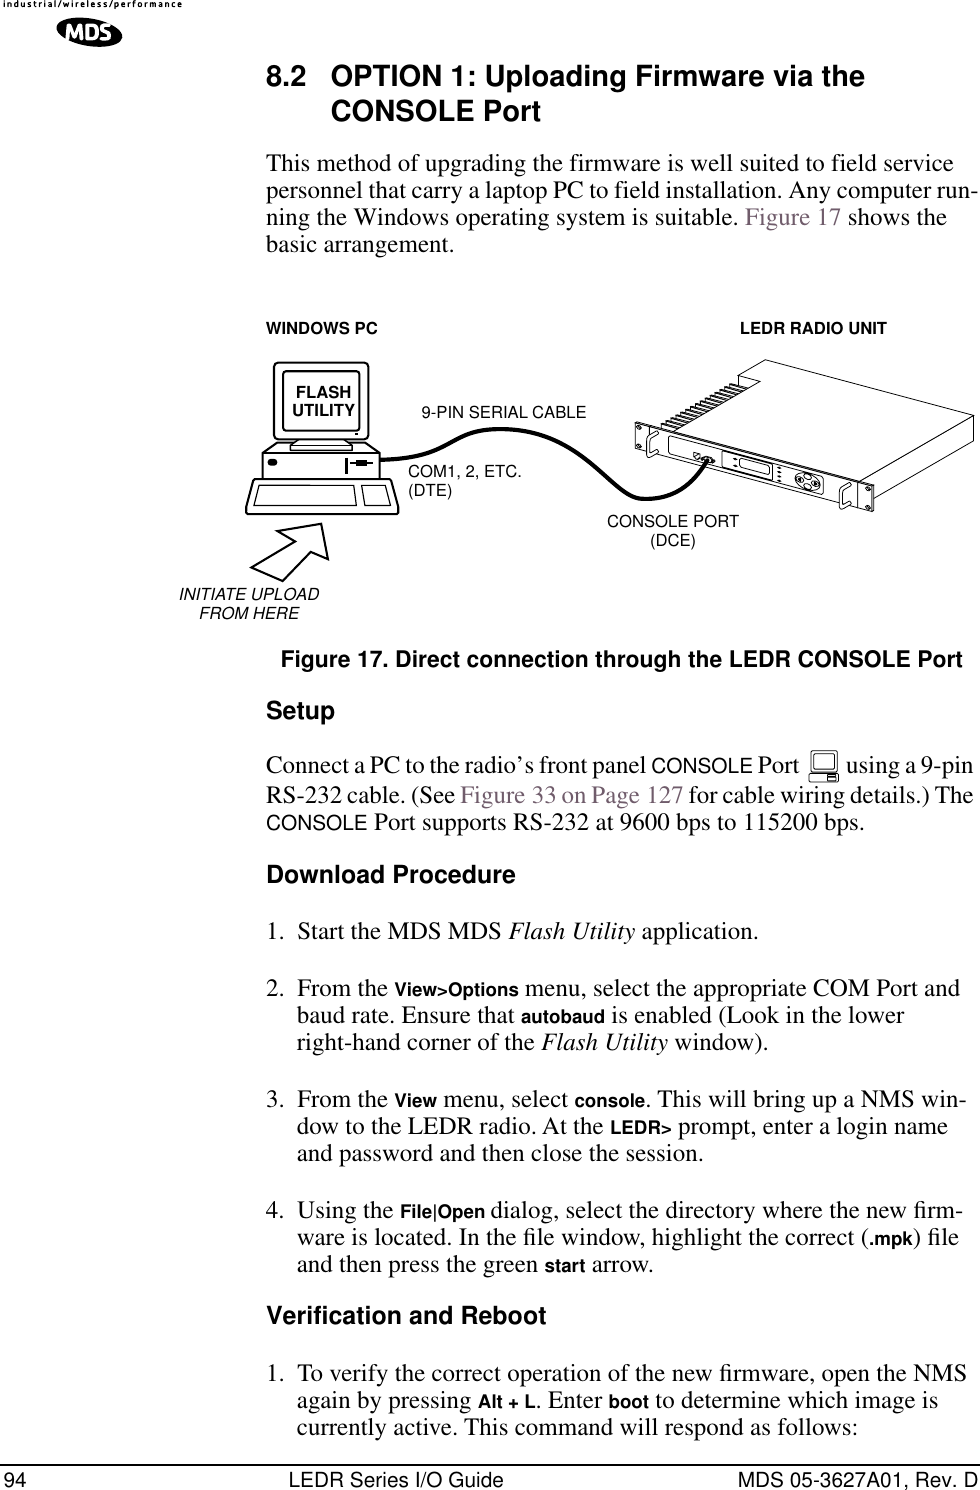 94 LEDR Series I/O Guide MDS 05-3627A01, Rev. D8.2 OPTION 1: Uploading Firmware via the CONSOLE PortThis method of upgrading the firmware is well suited to field service personnel that carry a laptop PC to field installation. Any computer run-ning the Windows operating system is suitable. Figure 17 shows the basic arrangement.Invisible place holderFigure 17. Direct connection through the LEDR CONSOLE PortSetupConnect a PC to the radio’s front panel CONSOLE Port   using a 9-pin RS-232 cable. (See Figure 33 on Page 127 for cable wiring details.) The CONSOLE Port supports RS-232 at 9600 bps to 115200 bps.Download Procedure1. Start the MDS MDS Flash Utility application. 2. From the View&gt;Options menu, select the appropriate COM Port and baud rate. Ensure that autobaud is enabled (Look in the lower right-hand corner of the Flash Utility window). 3. From the View menu, select console. This will bring up a NMS win-dow to the LEDR radio. At the LEDR&gt; prompt, enter a login name and password and then close the session. 4. Using the File|Open dialog, select the directory where the new ﬁrm-ware is located. In the ﬁle window, highlight the correct (.mpk) ﬁle and then press the green start arrow. Verification and Reboot1. To verify the correct operation of the new ﬁrmware, open the NMS again by pressing Alt + L. Enter boot to determine which image is currently active. This command will respond as follows:FLASHUTILITYCOM1, 2, ETC.(DTE)9-PIN SERIAL CABLECONSOLE PORT(DCE)INITIATE UPLOADFROM HERELEDR RADIO UNITWINDOWS PC